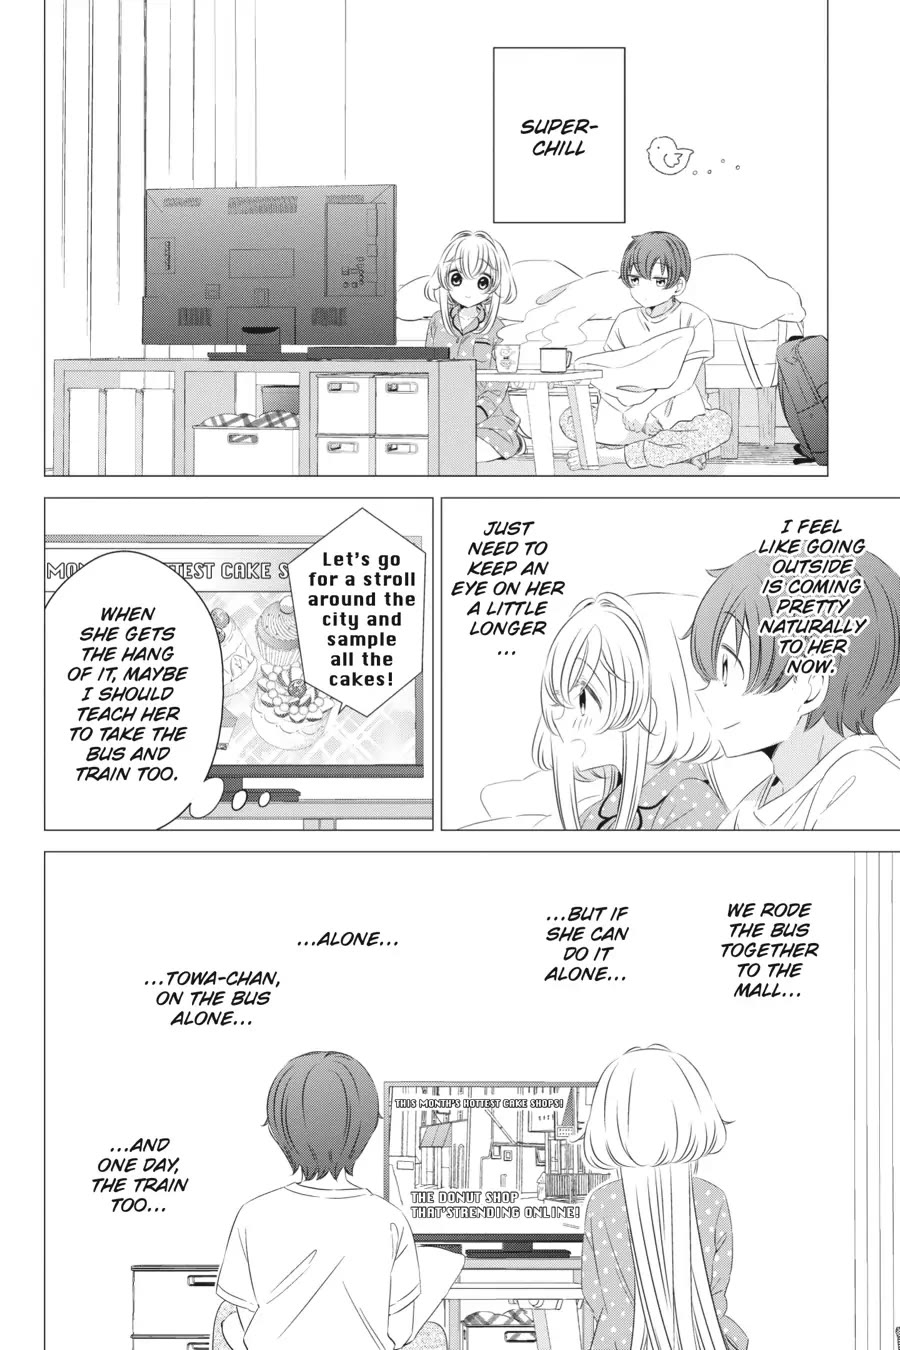 Studio Apartment, Good Lighting, Angel Included. - Page 4